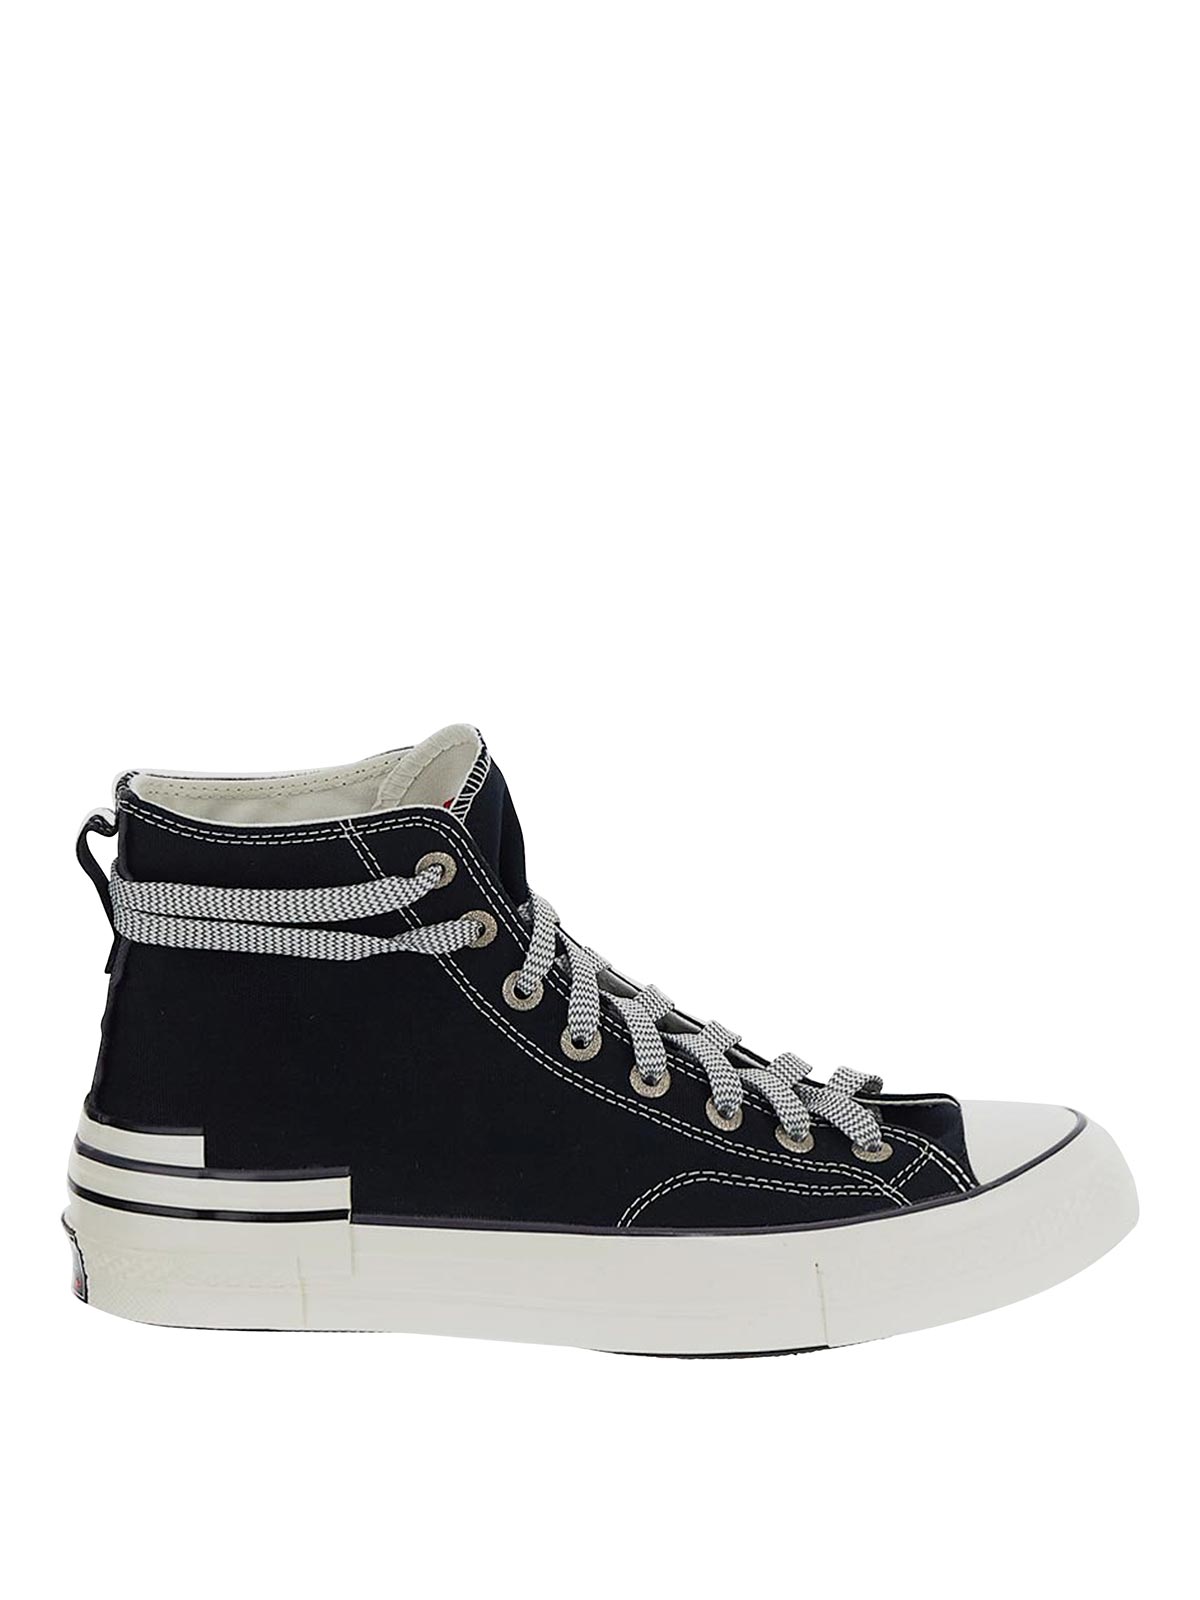 Converse High-top Sneakers In Black With Hacked